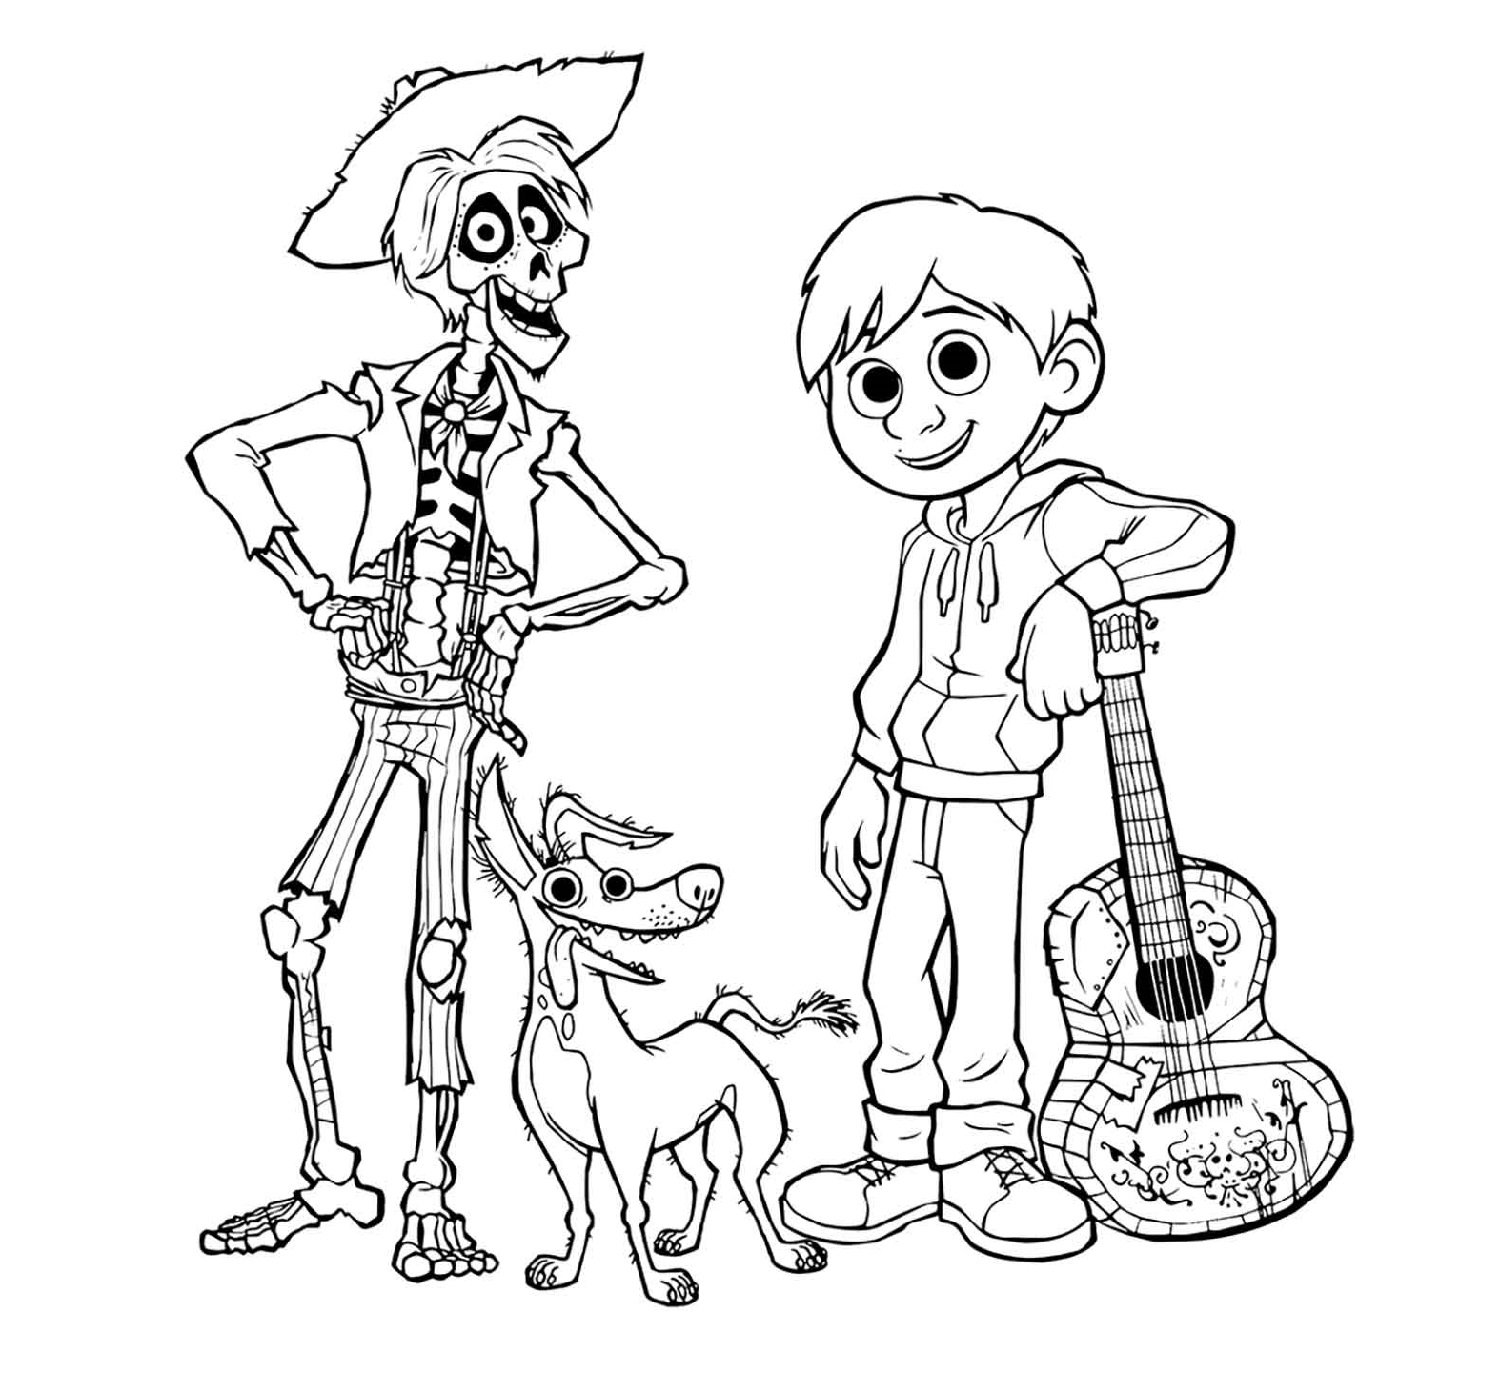 Pixar Coco Coloring Pages | 101 Coloring